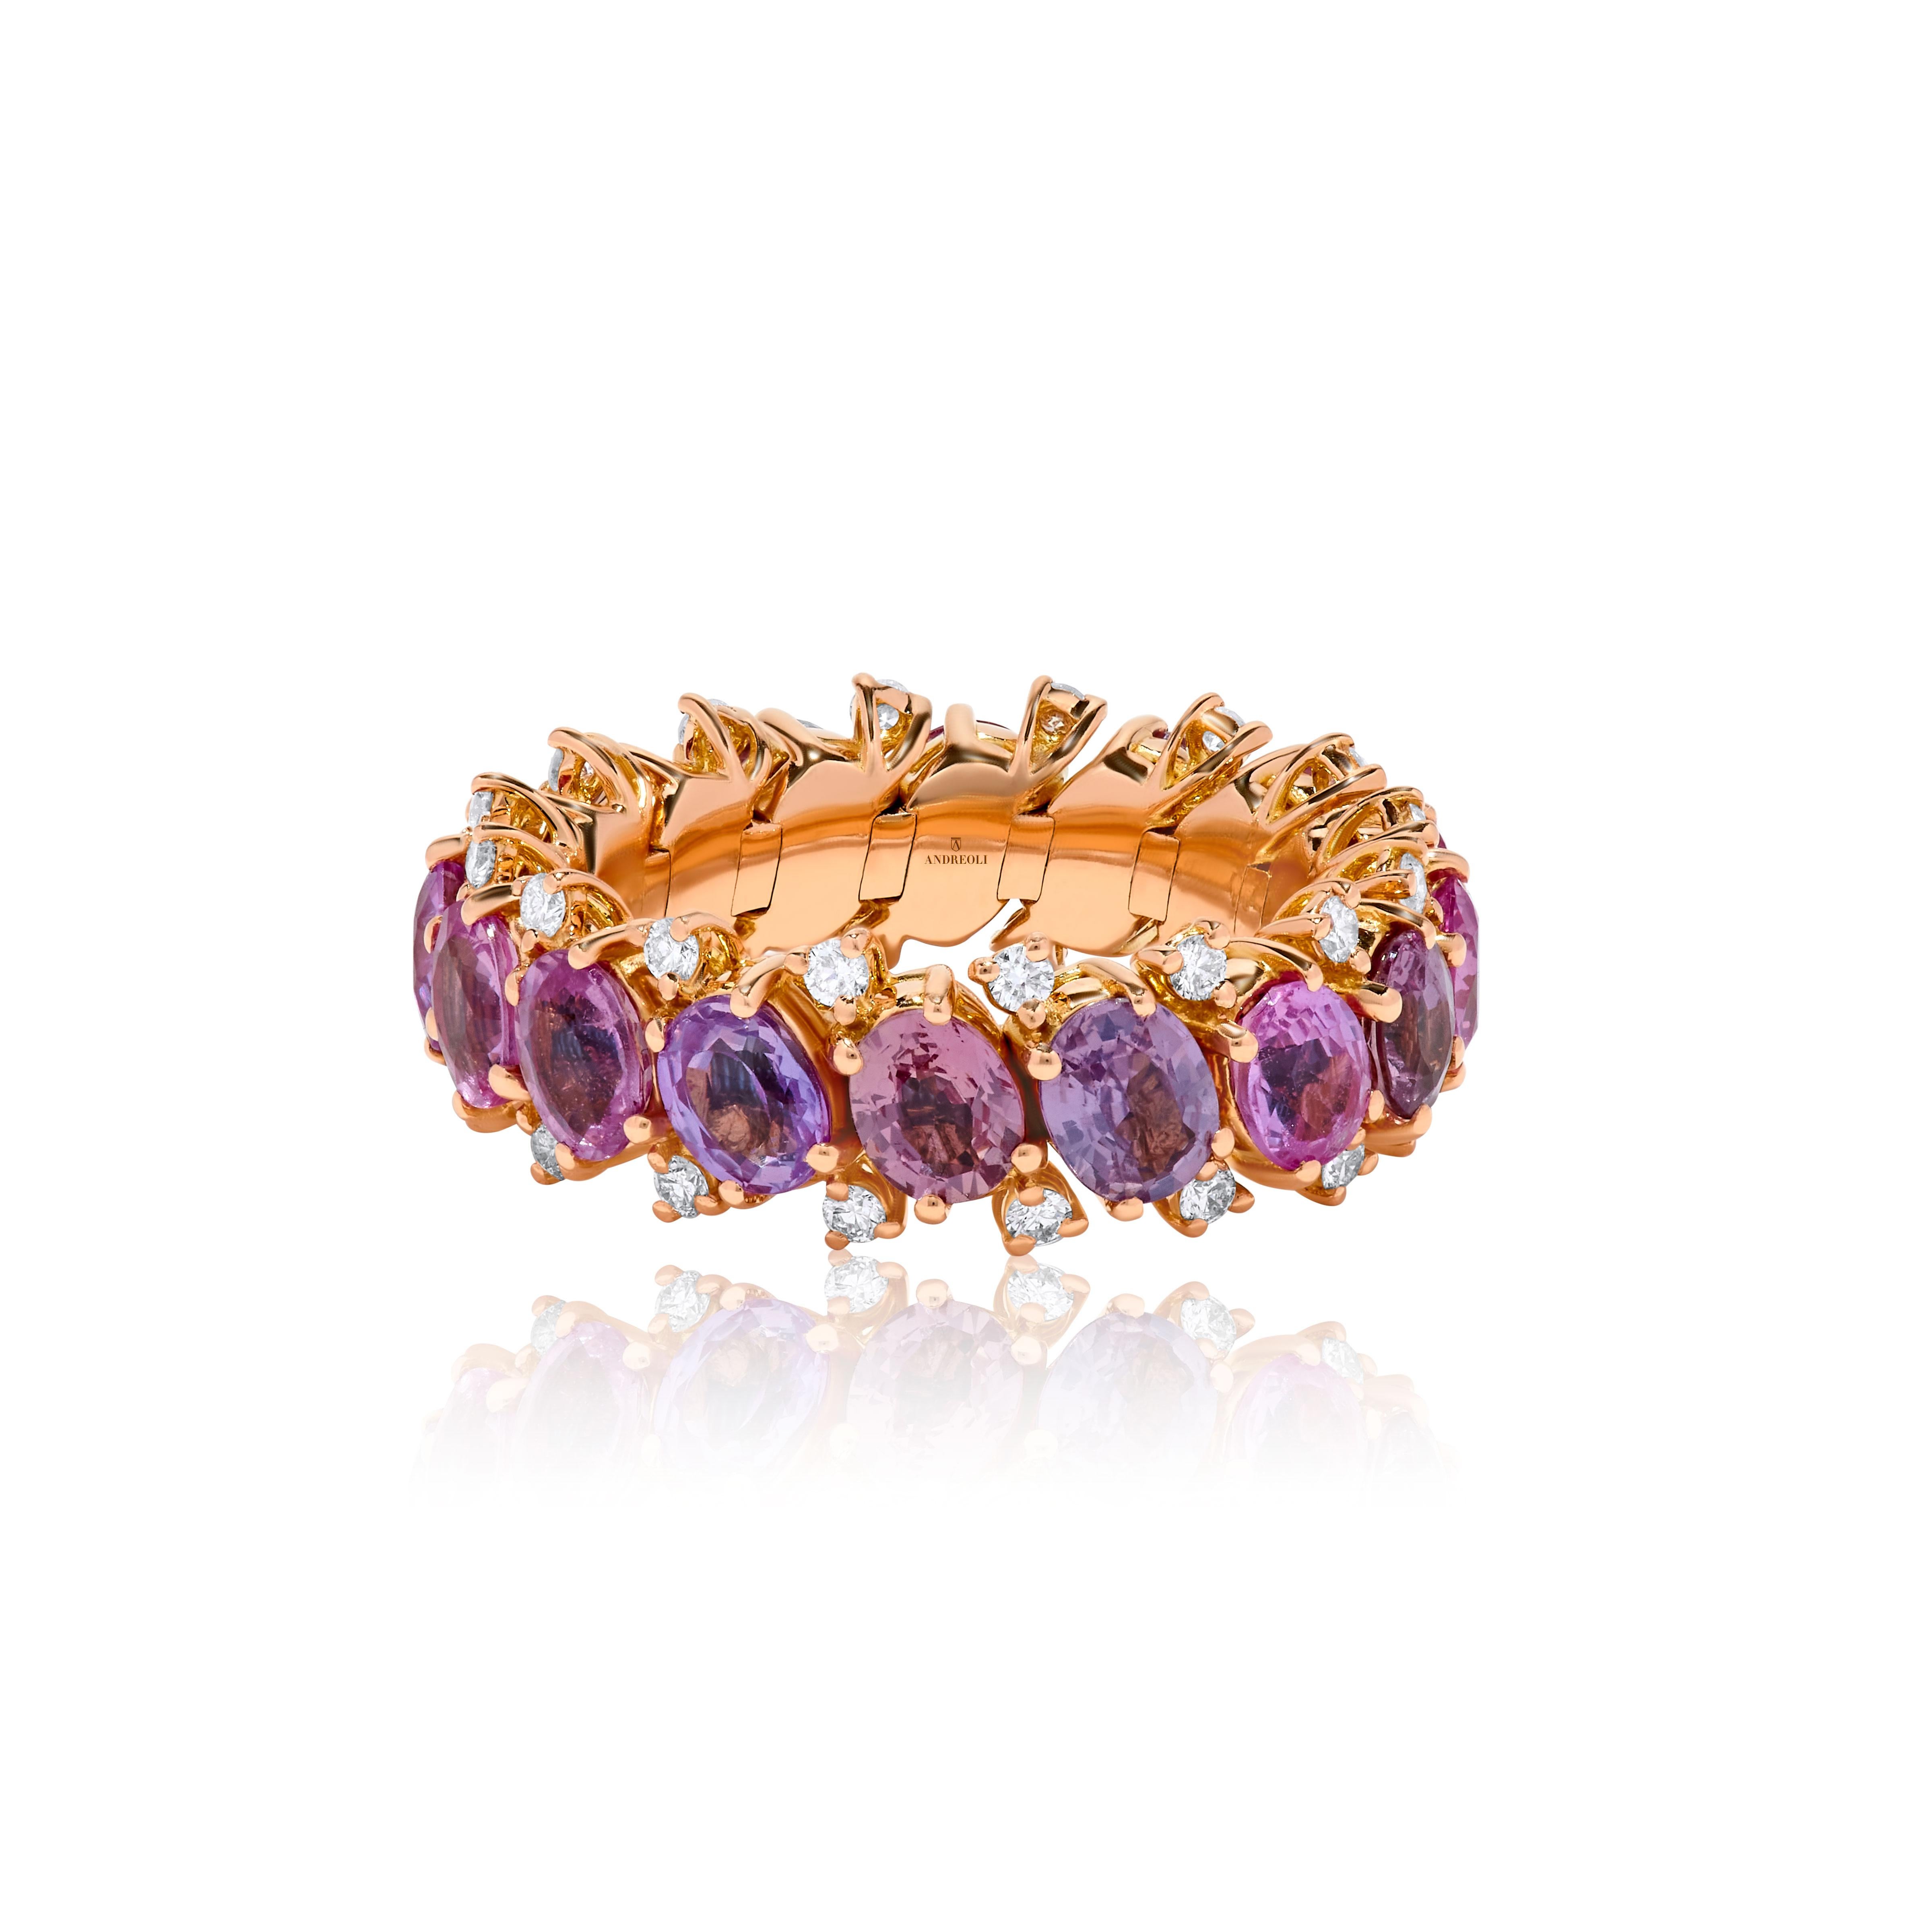 Andreoli Diamond Pink Sapphire 18 Karat Rose Gold Stretchy Ring

This ring features:
- 0.54 Carat Diamond
- 7.21 Carat Pink Sapphire
- 7.70 Gram 18K Rose Gold
- Stretchy Band
- Made In Italy